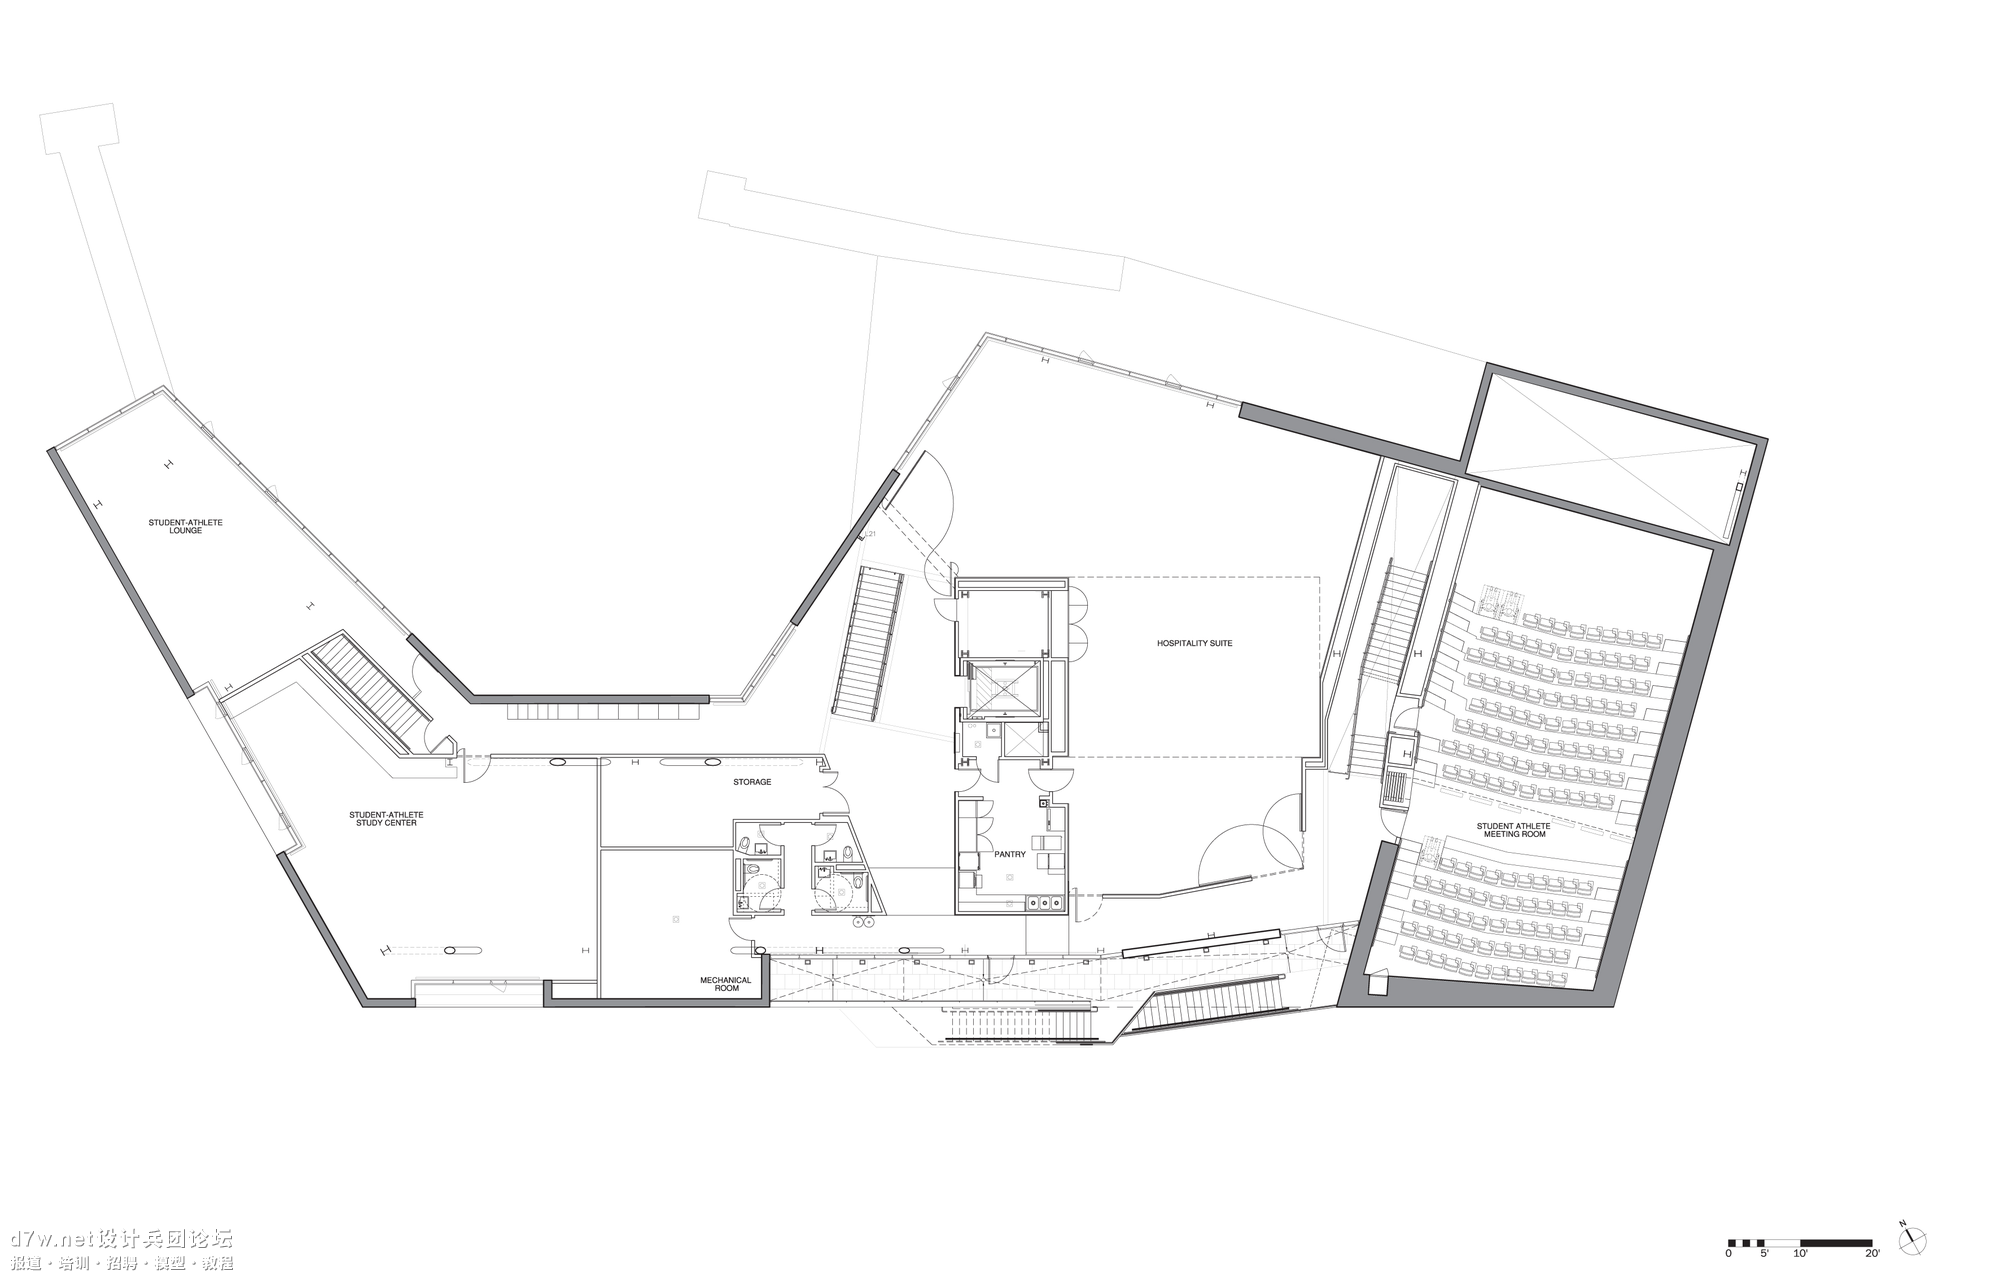 518bcf6ab3fc4ba1bf00001d_campbell-sports-center-steven-holl-architects_floor_05_plan.png